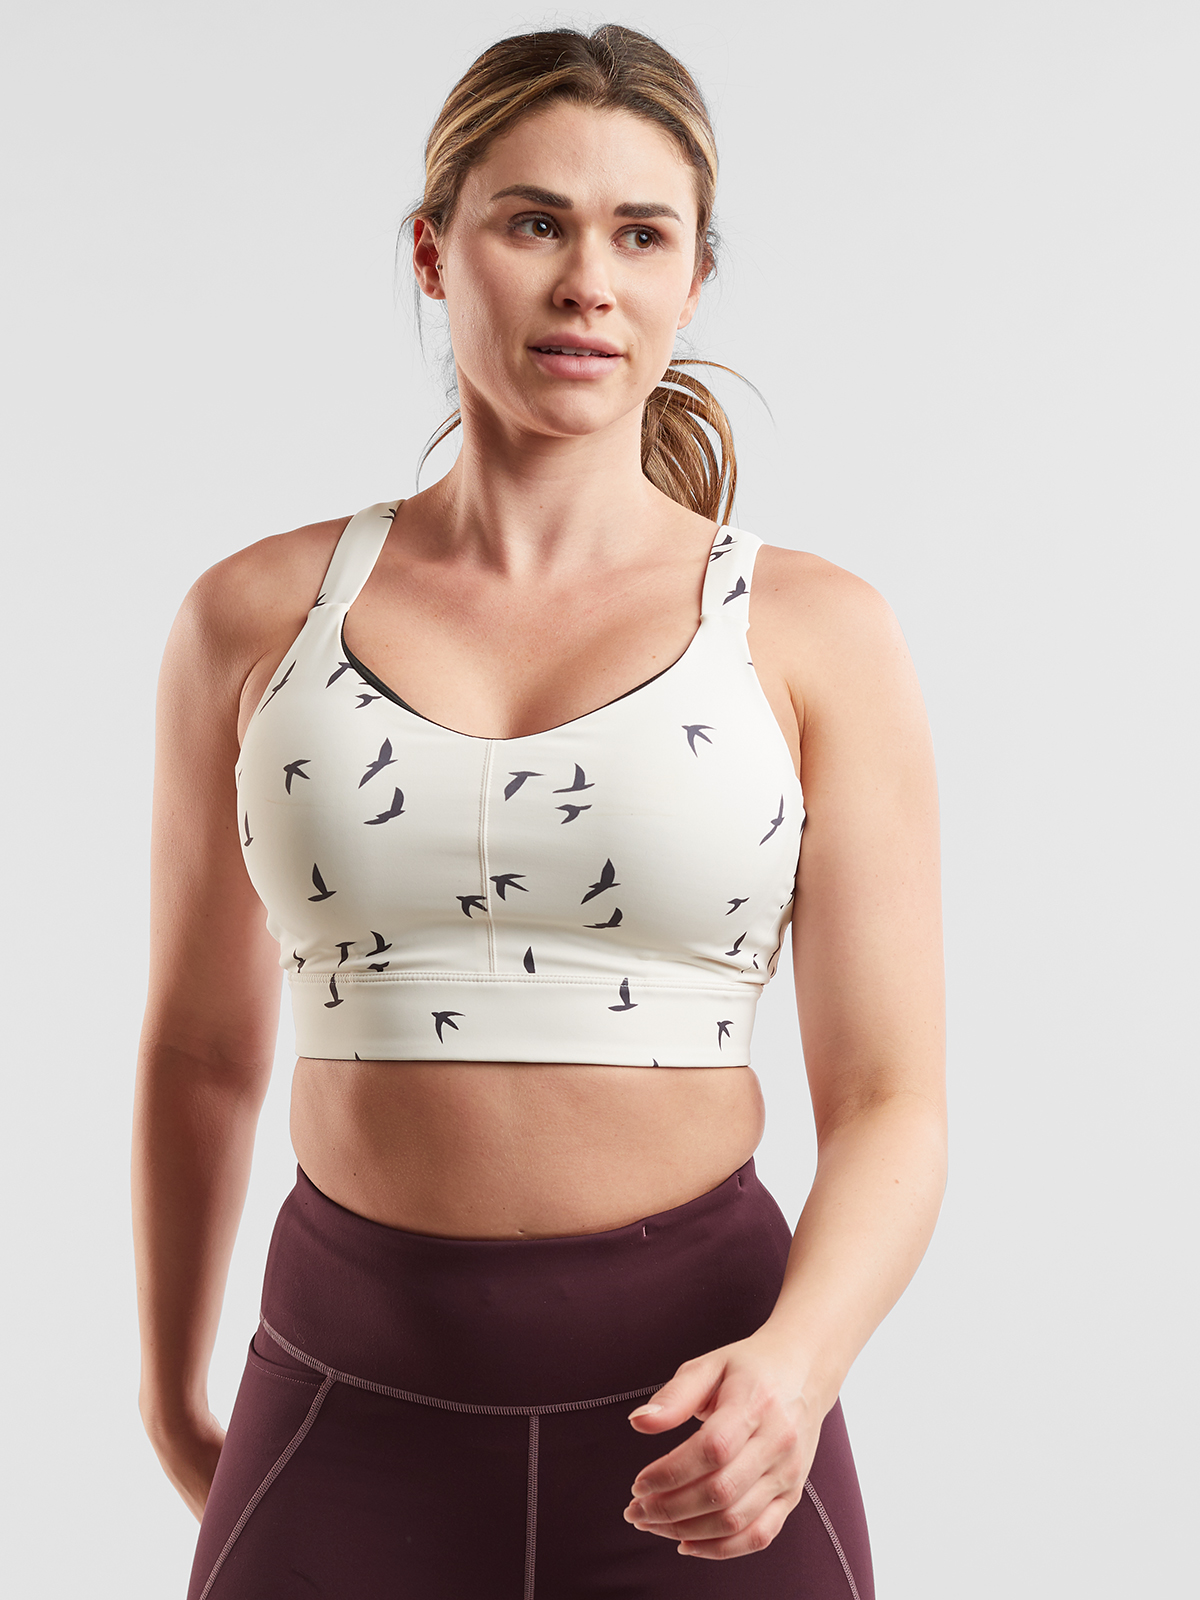 Ladies, Here's Exactly How Your Sports Bras Are Trialled & Tested